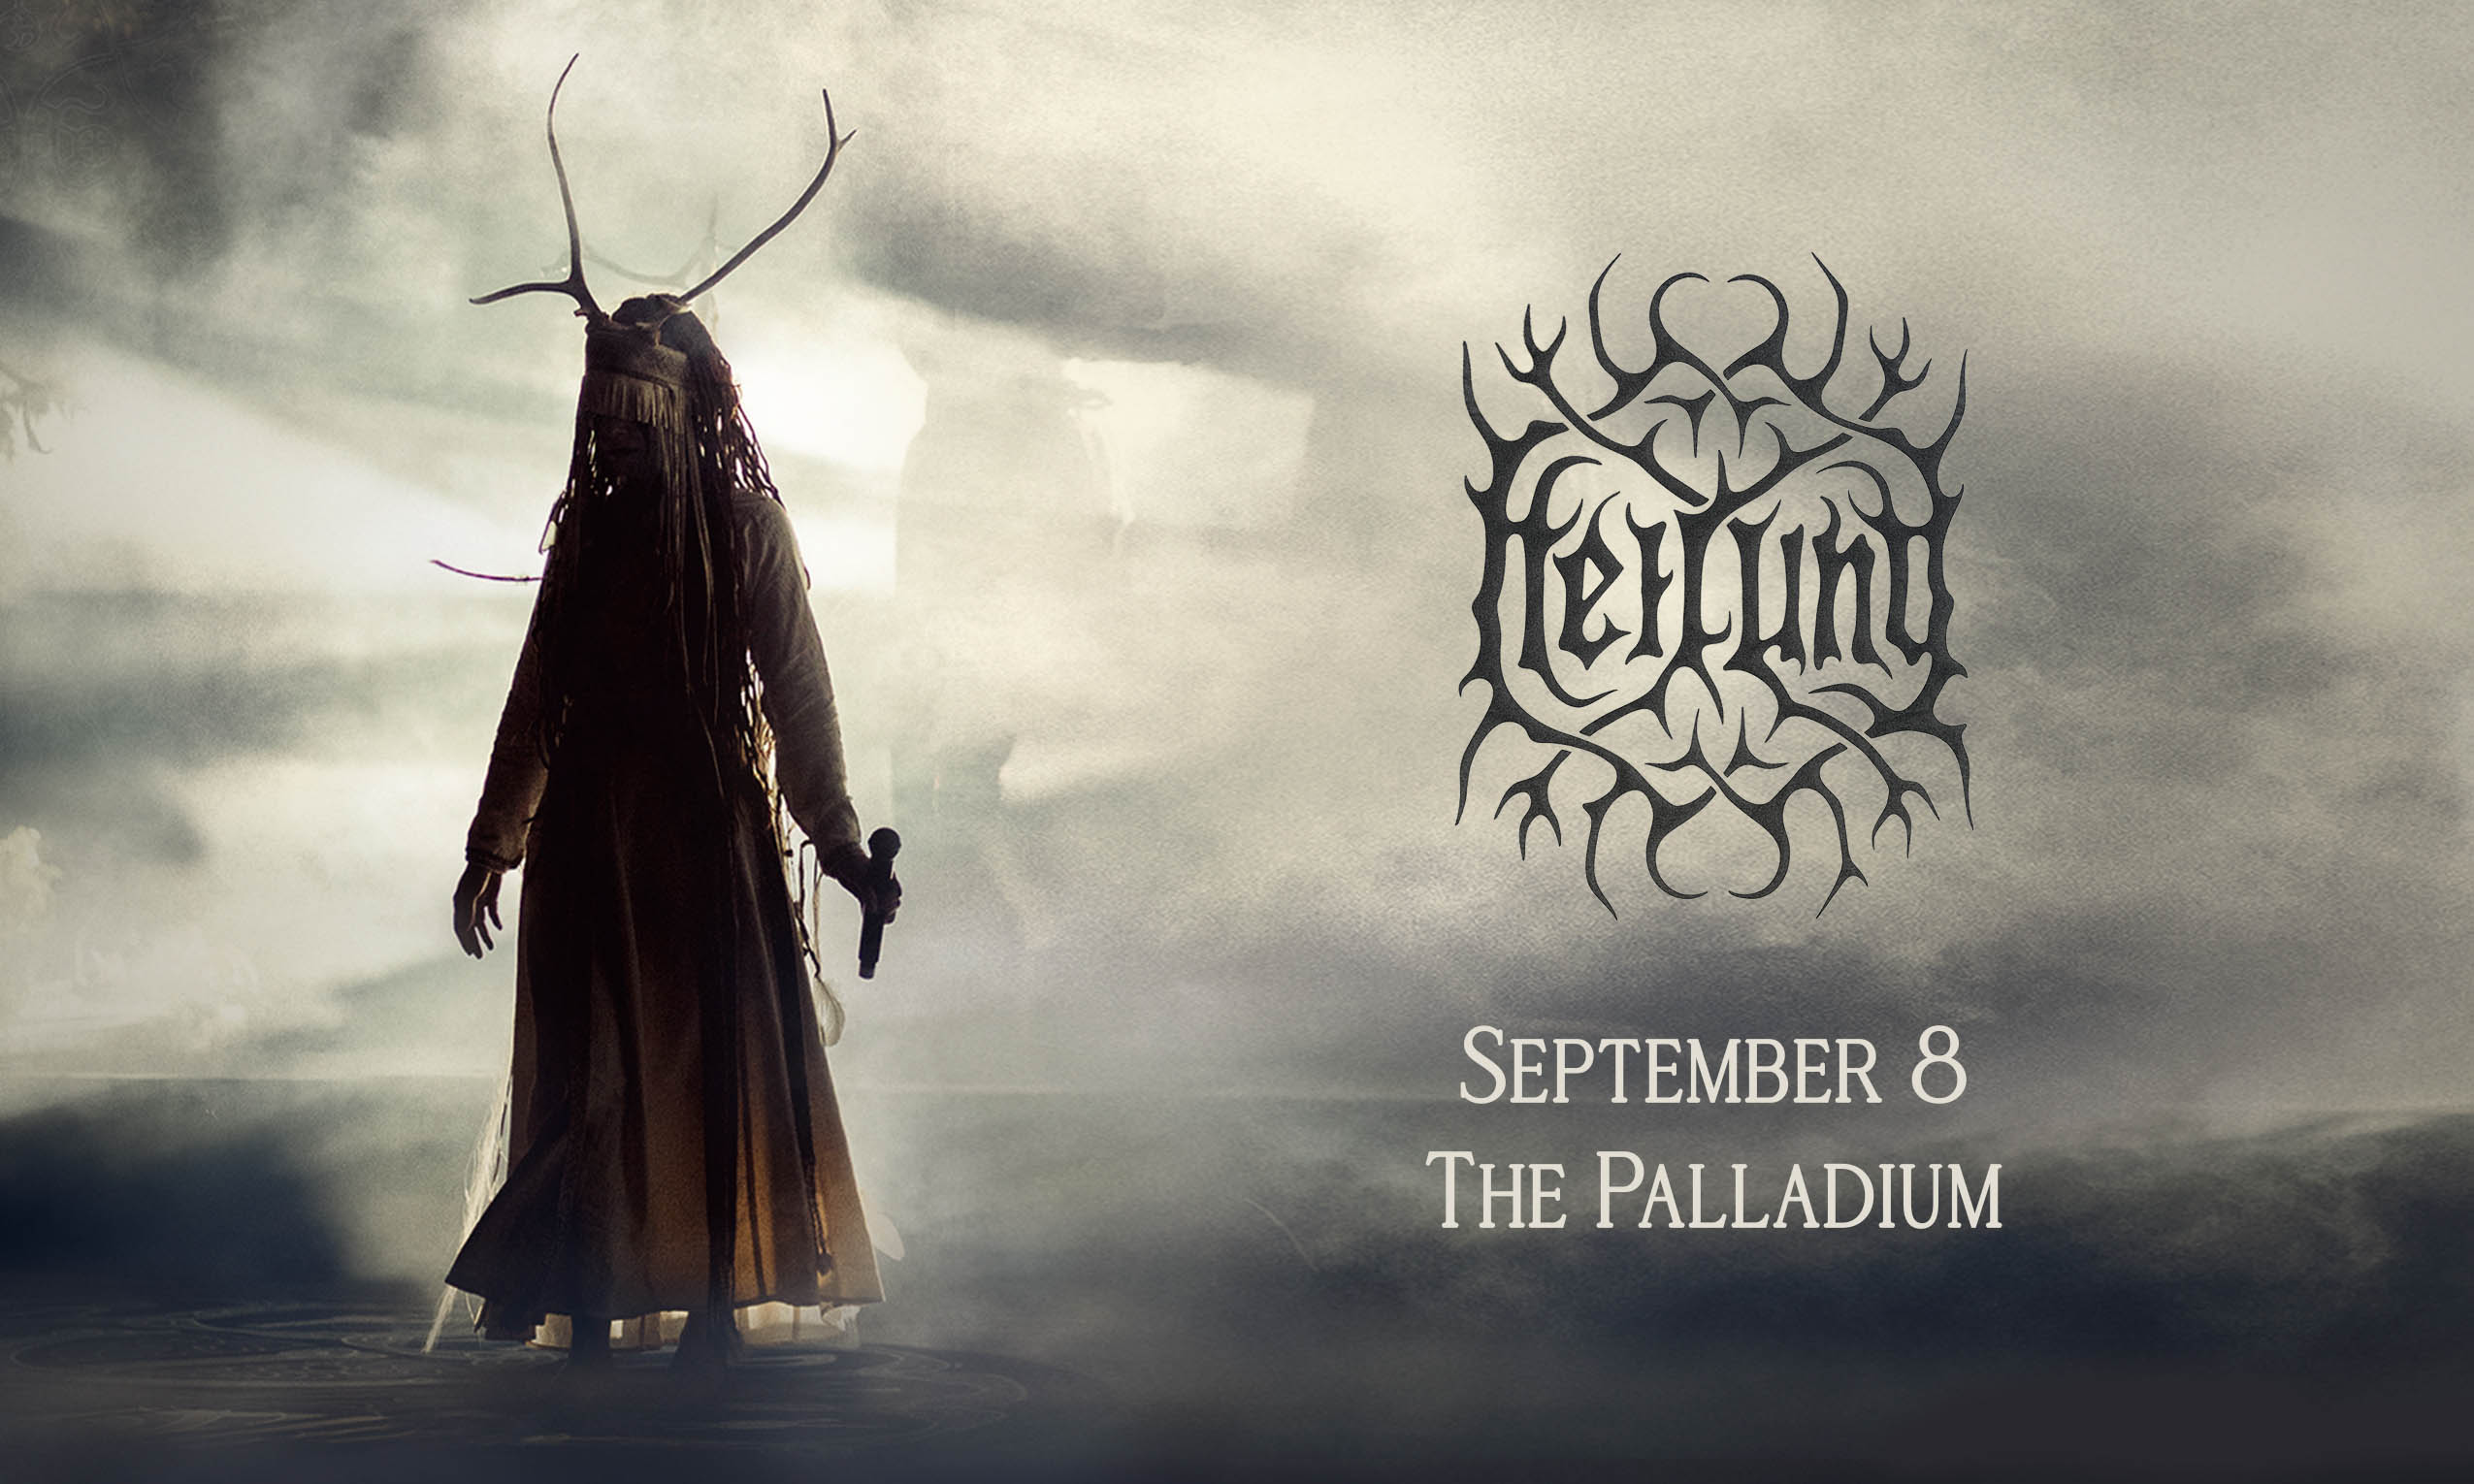 HEILUNG, the enigmatic world music collective, is bringing their North American tour to Massachusetts! HEILUNG's ritual is neither a performance nor a concert; it is a fully immersive ceremony that connects its listeners with the elements of nature through music, dance, and spirituality. Sing, howl and dance with them in Worcester at The Palladium on September 8th.